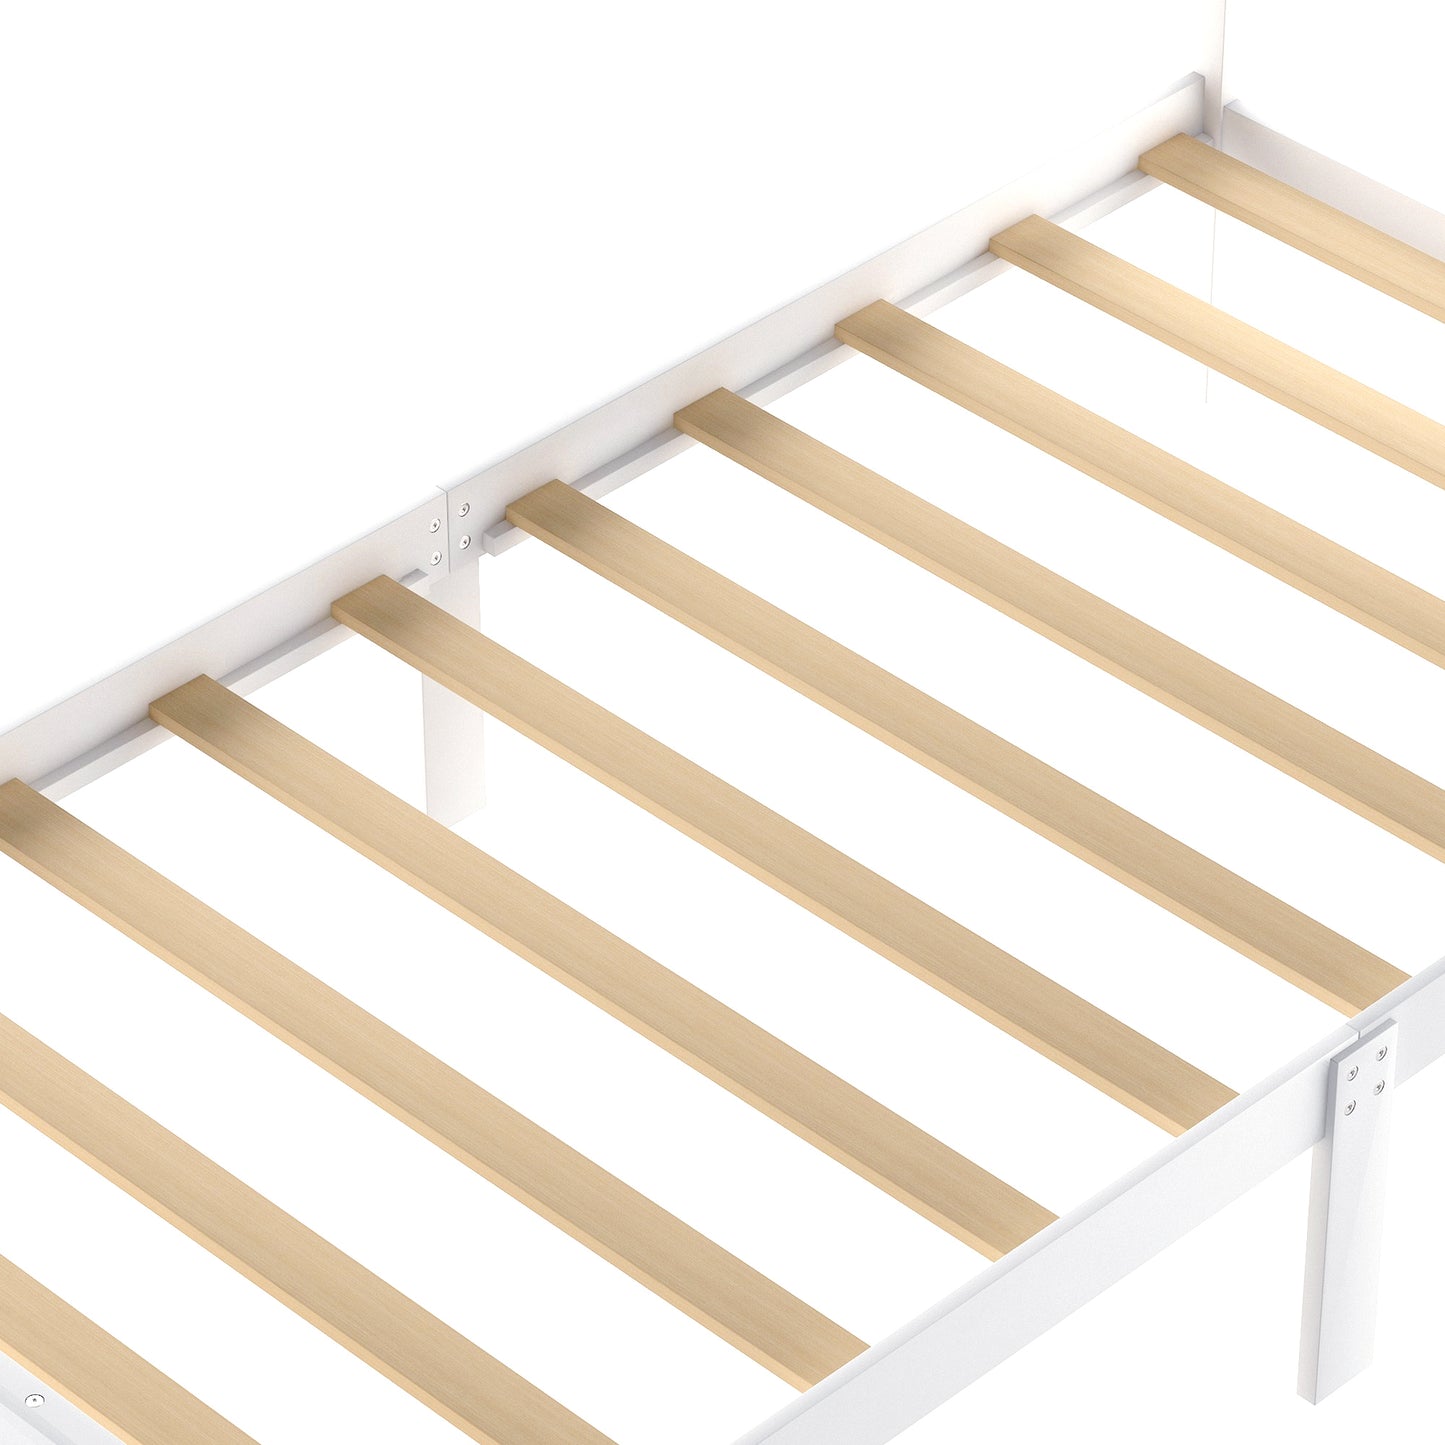 Twin Size Platform Bed with Under-bed Drawer, White